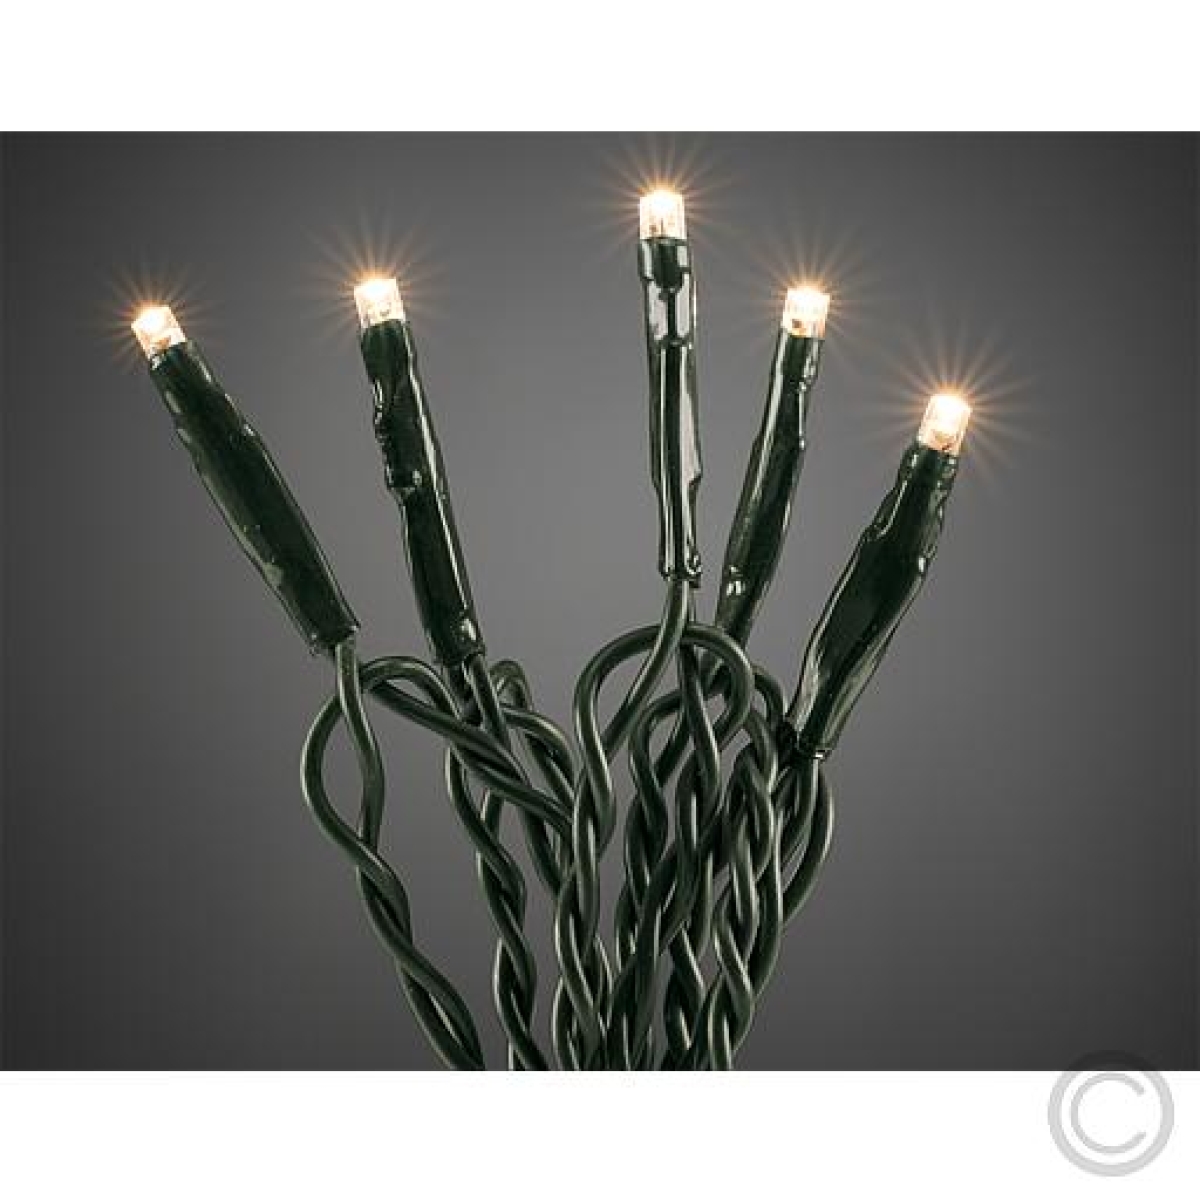 KonstsmideMicro LED light chain 100 flg. ww, green cable. 6354-120Article-No: 840450